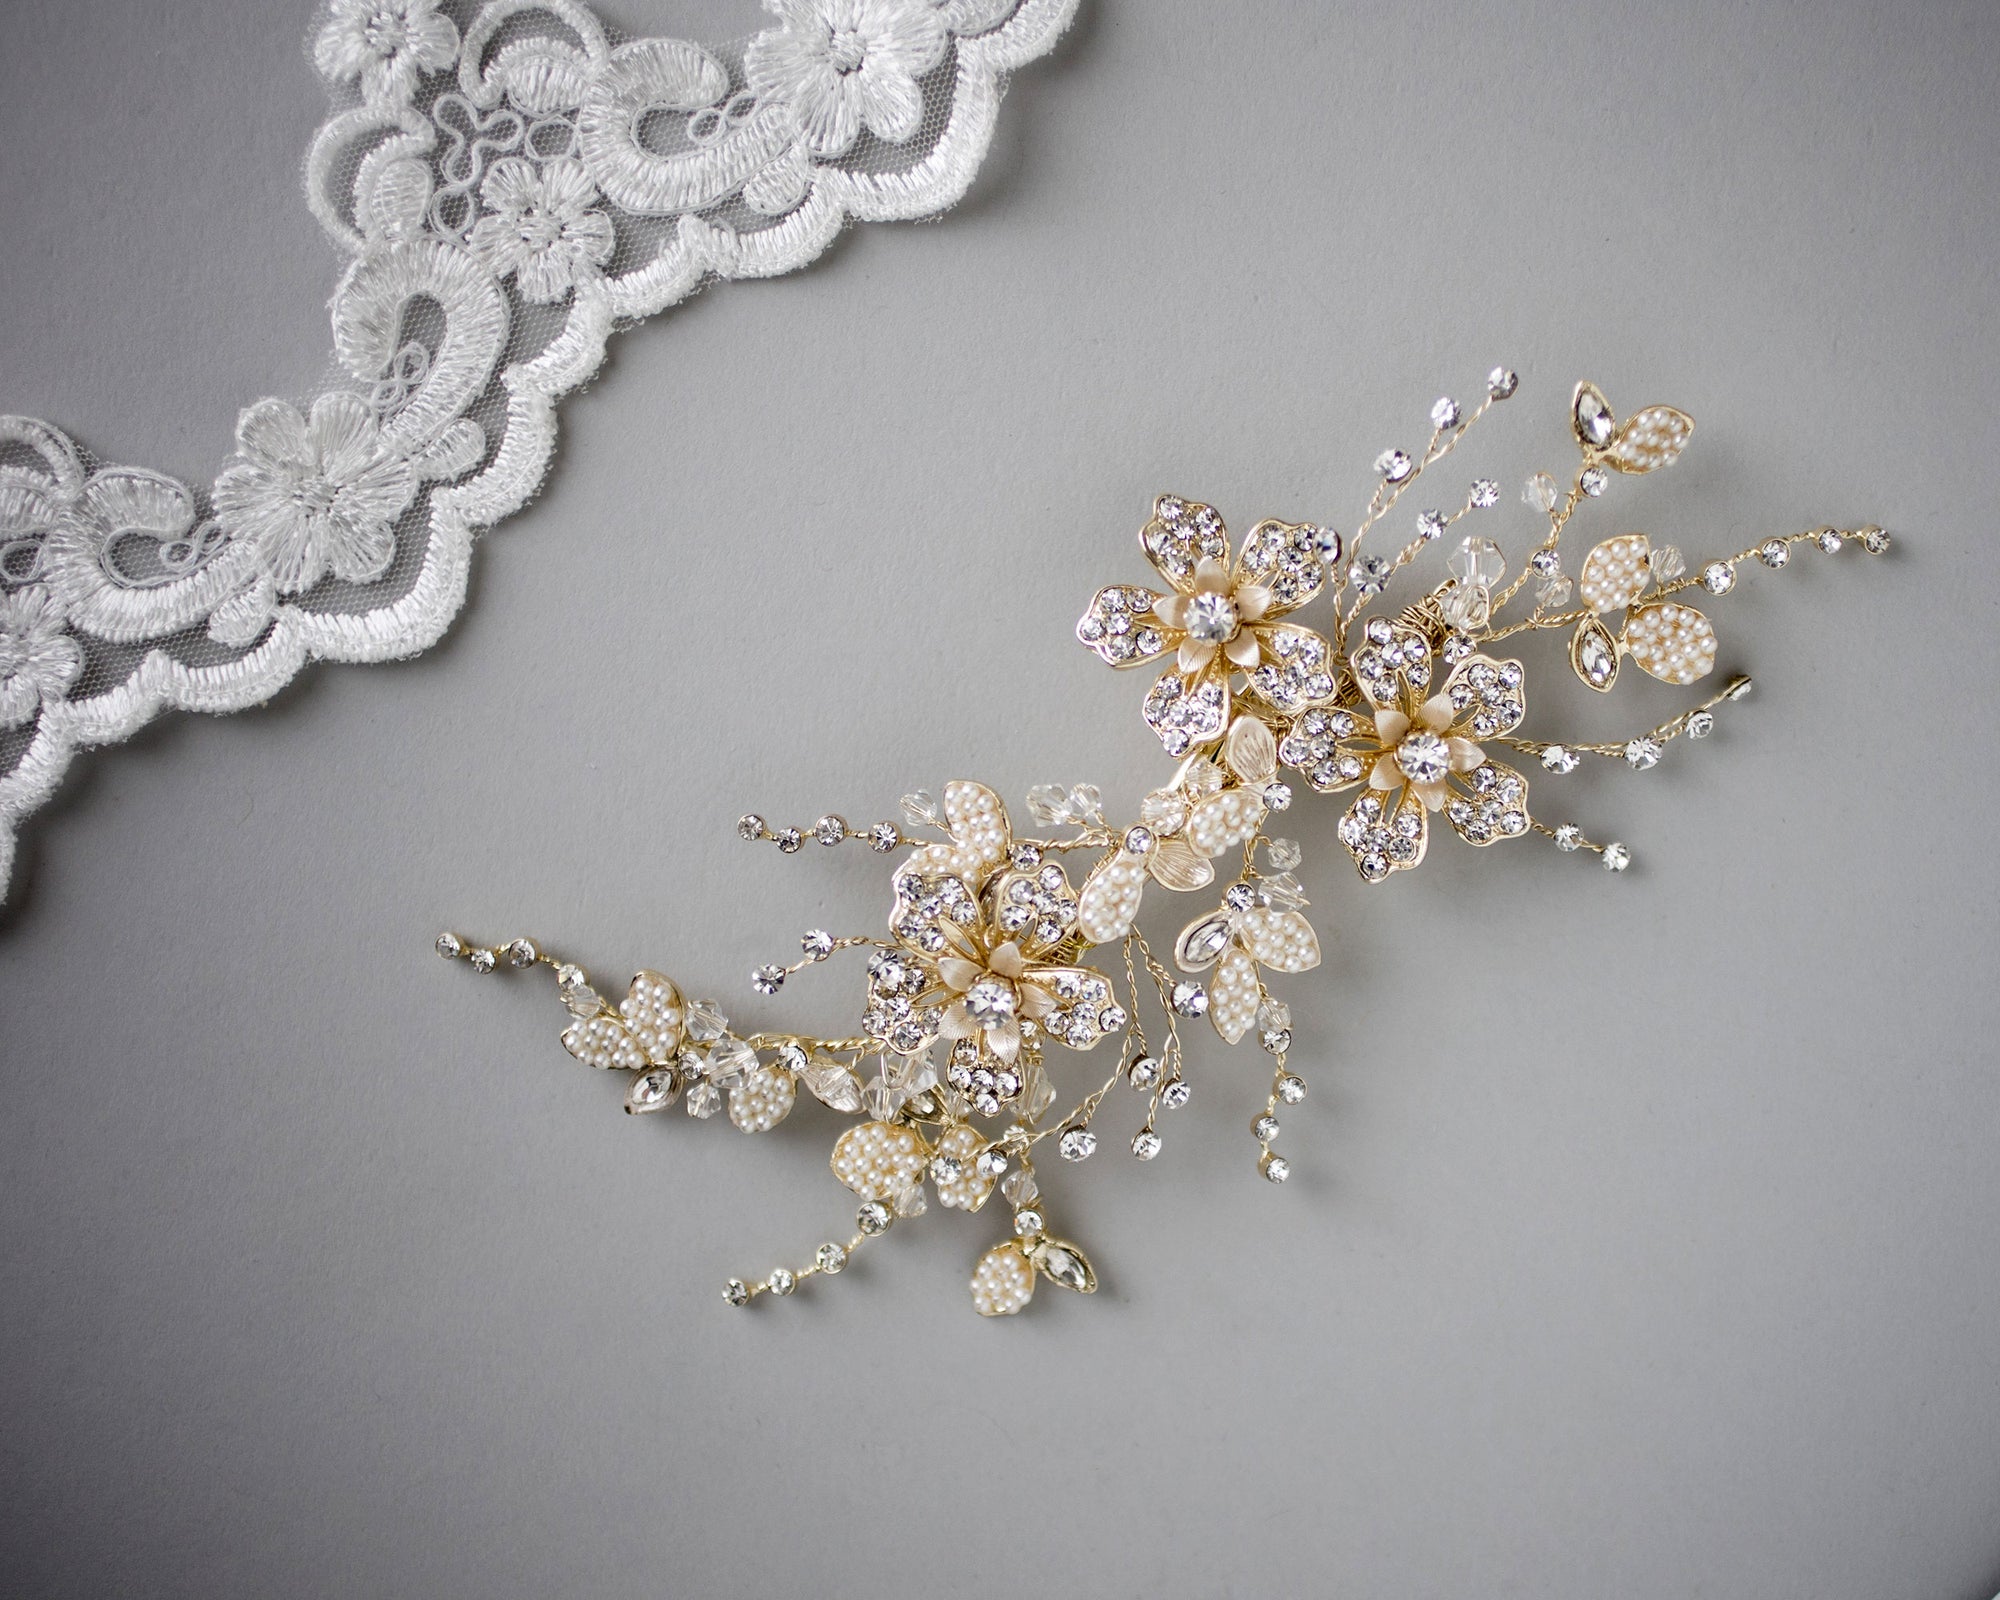 Gold Bridal Hair Clip with Pearled Leaves